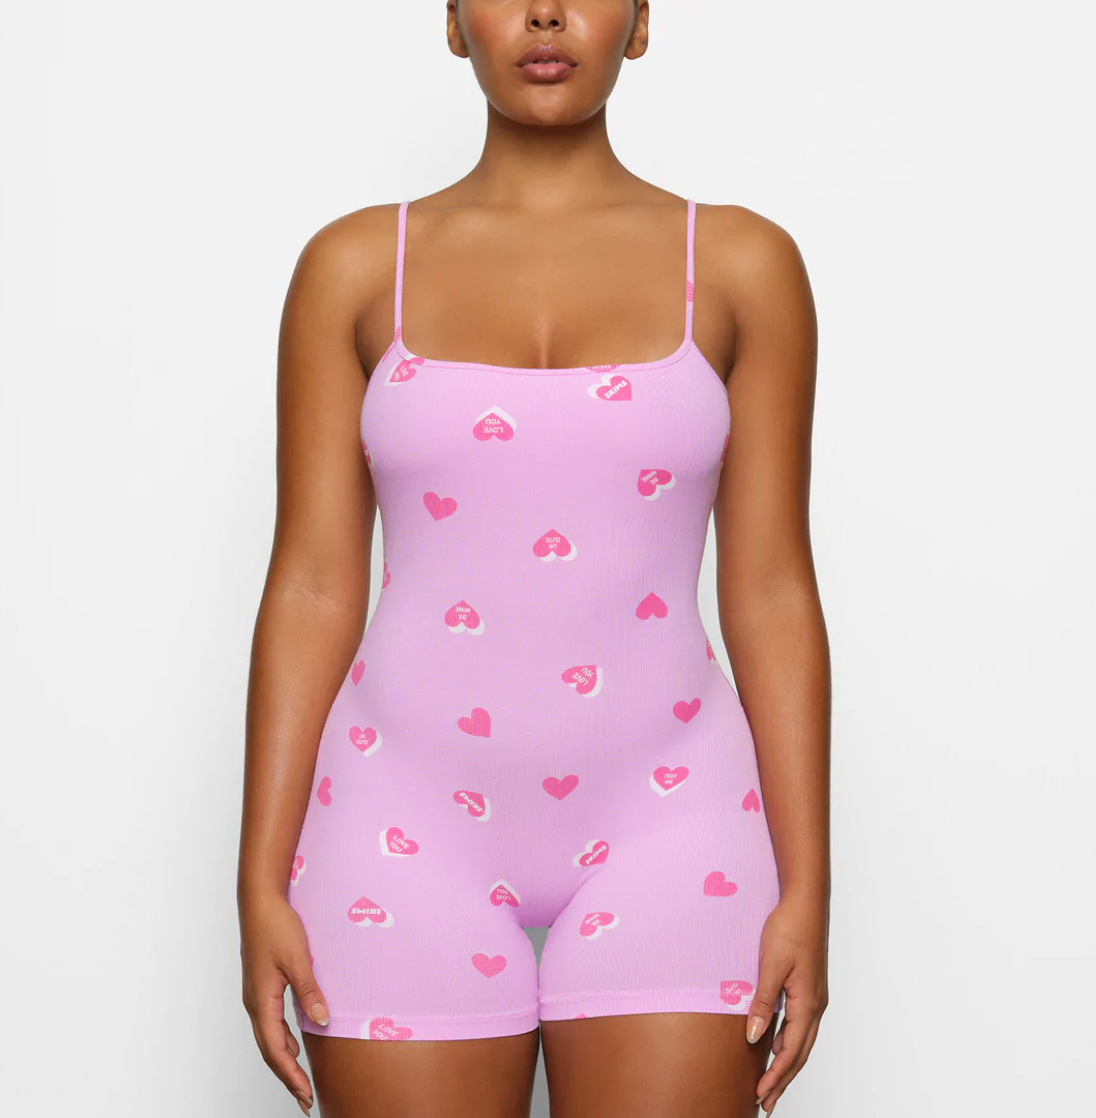 skims bodysuit try on 💗💕 Here's 3 cute Valentine's Day outfits